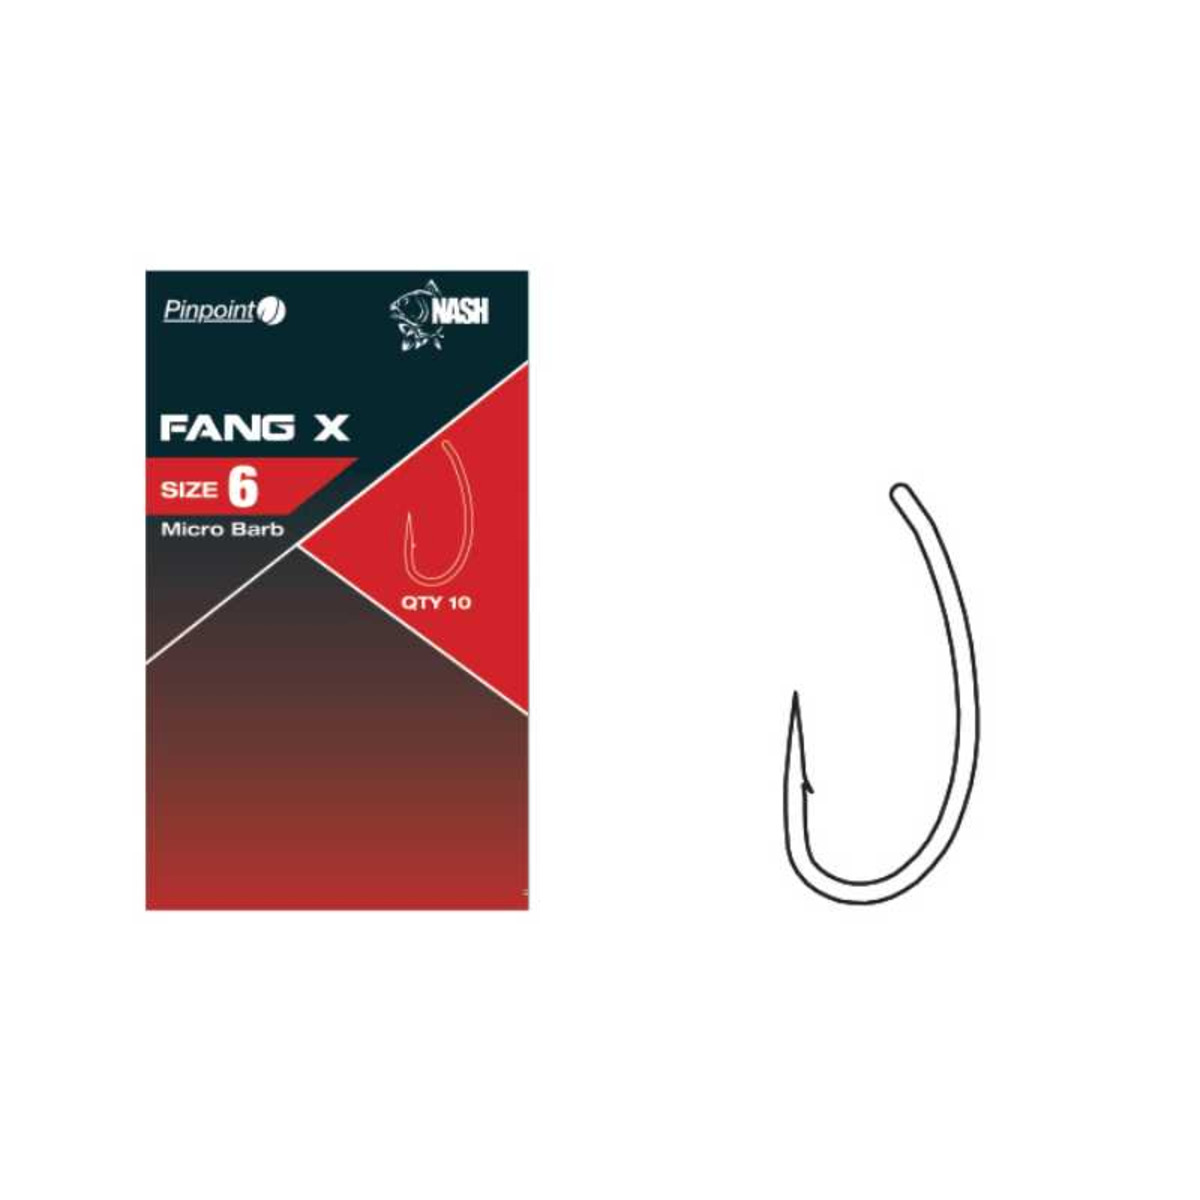 Nash Fang X - Size 6 Micro Barbed